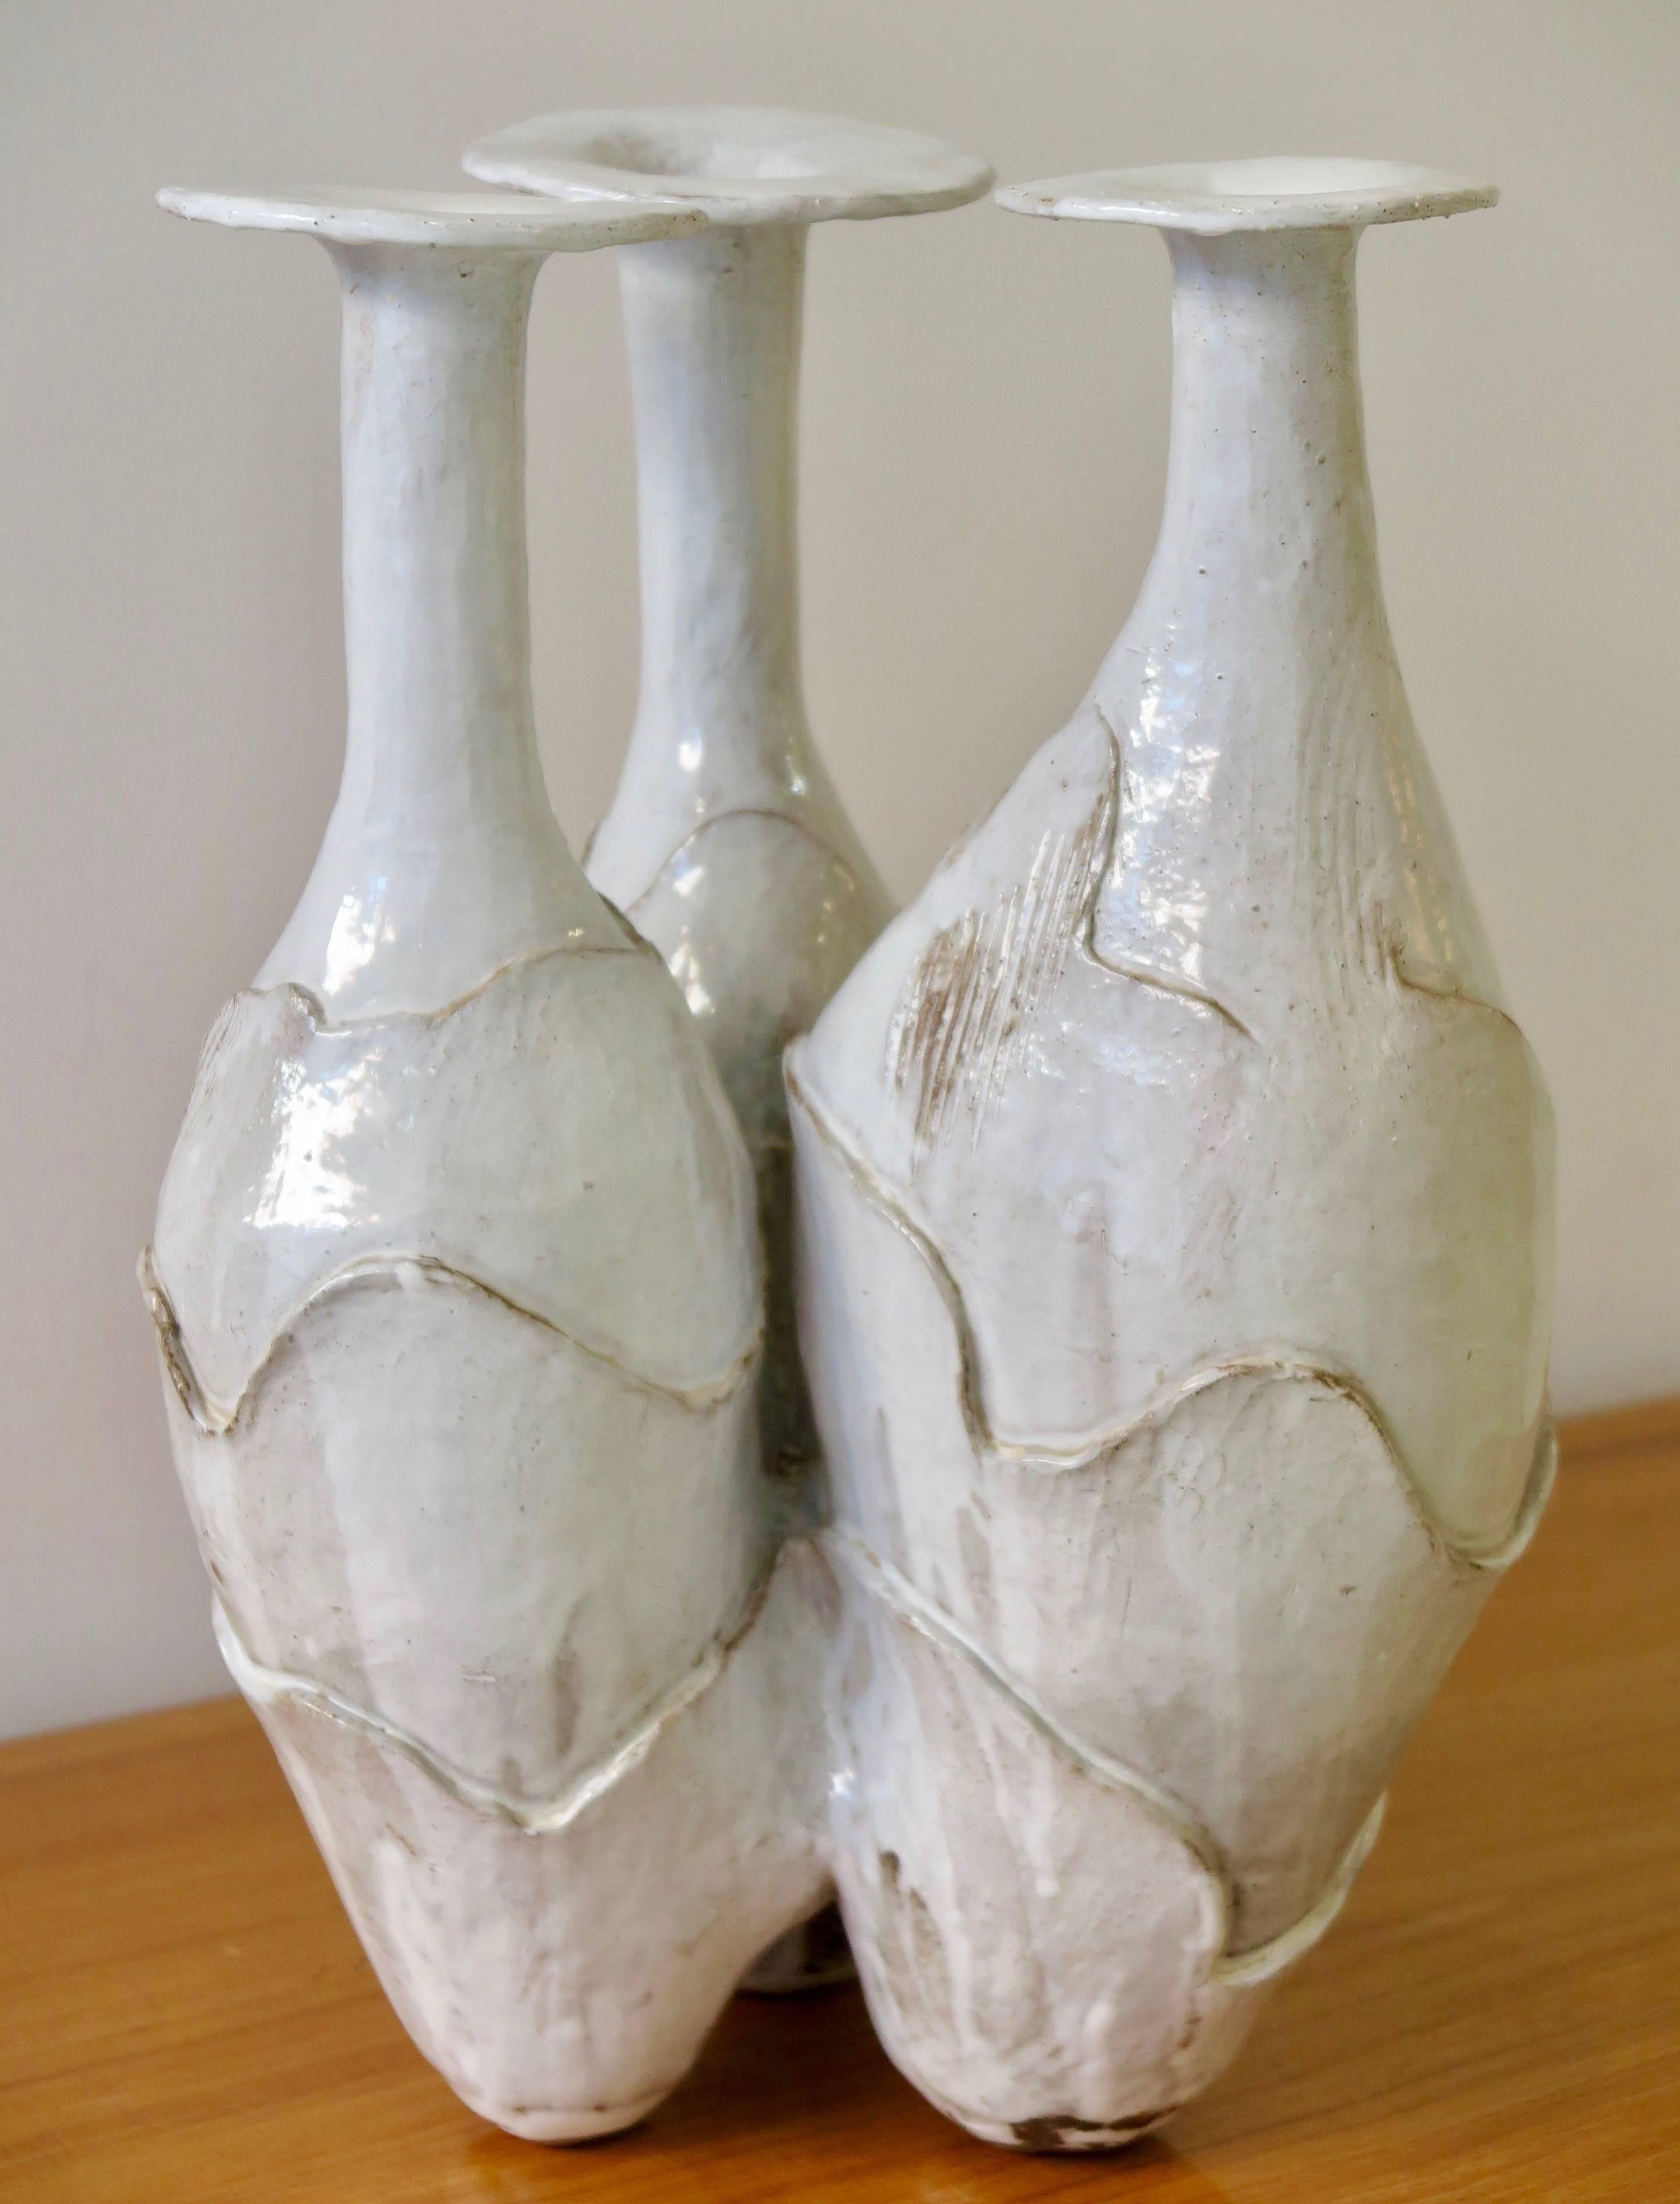 Biomorphic glazed ceramic vase in deep milky white shades with three attached vases.